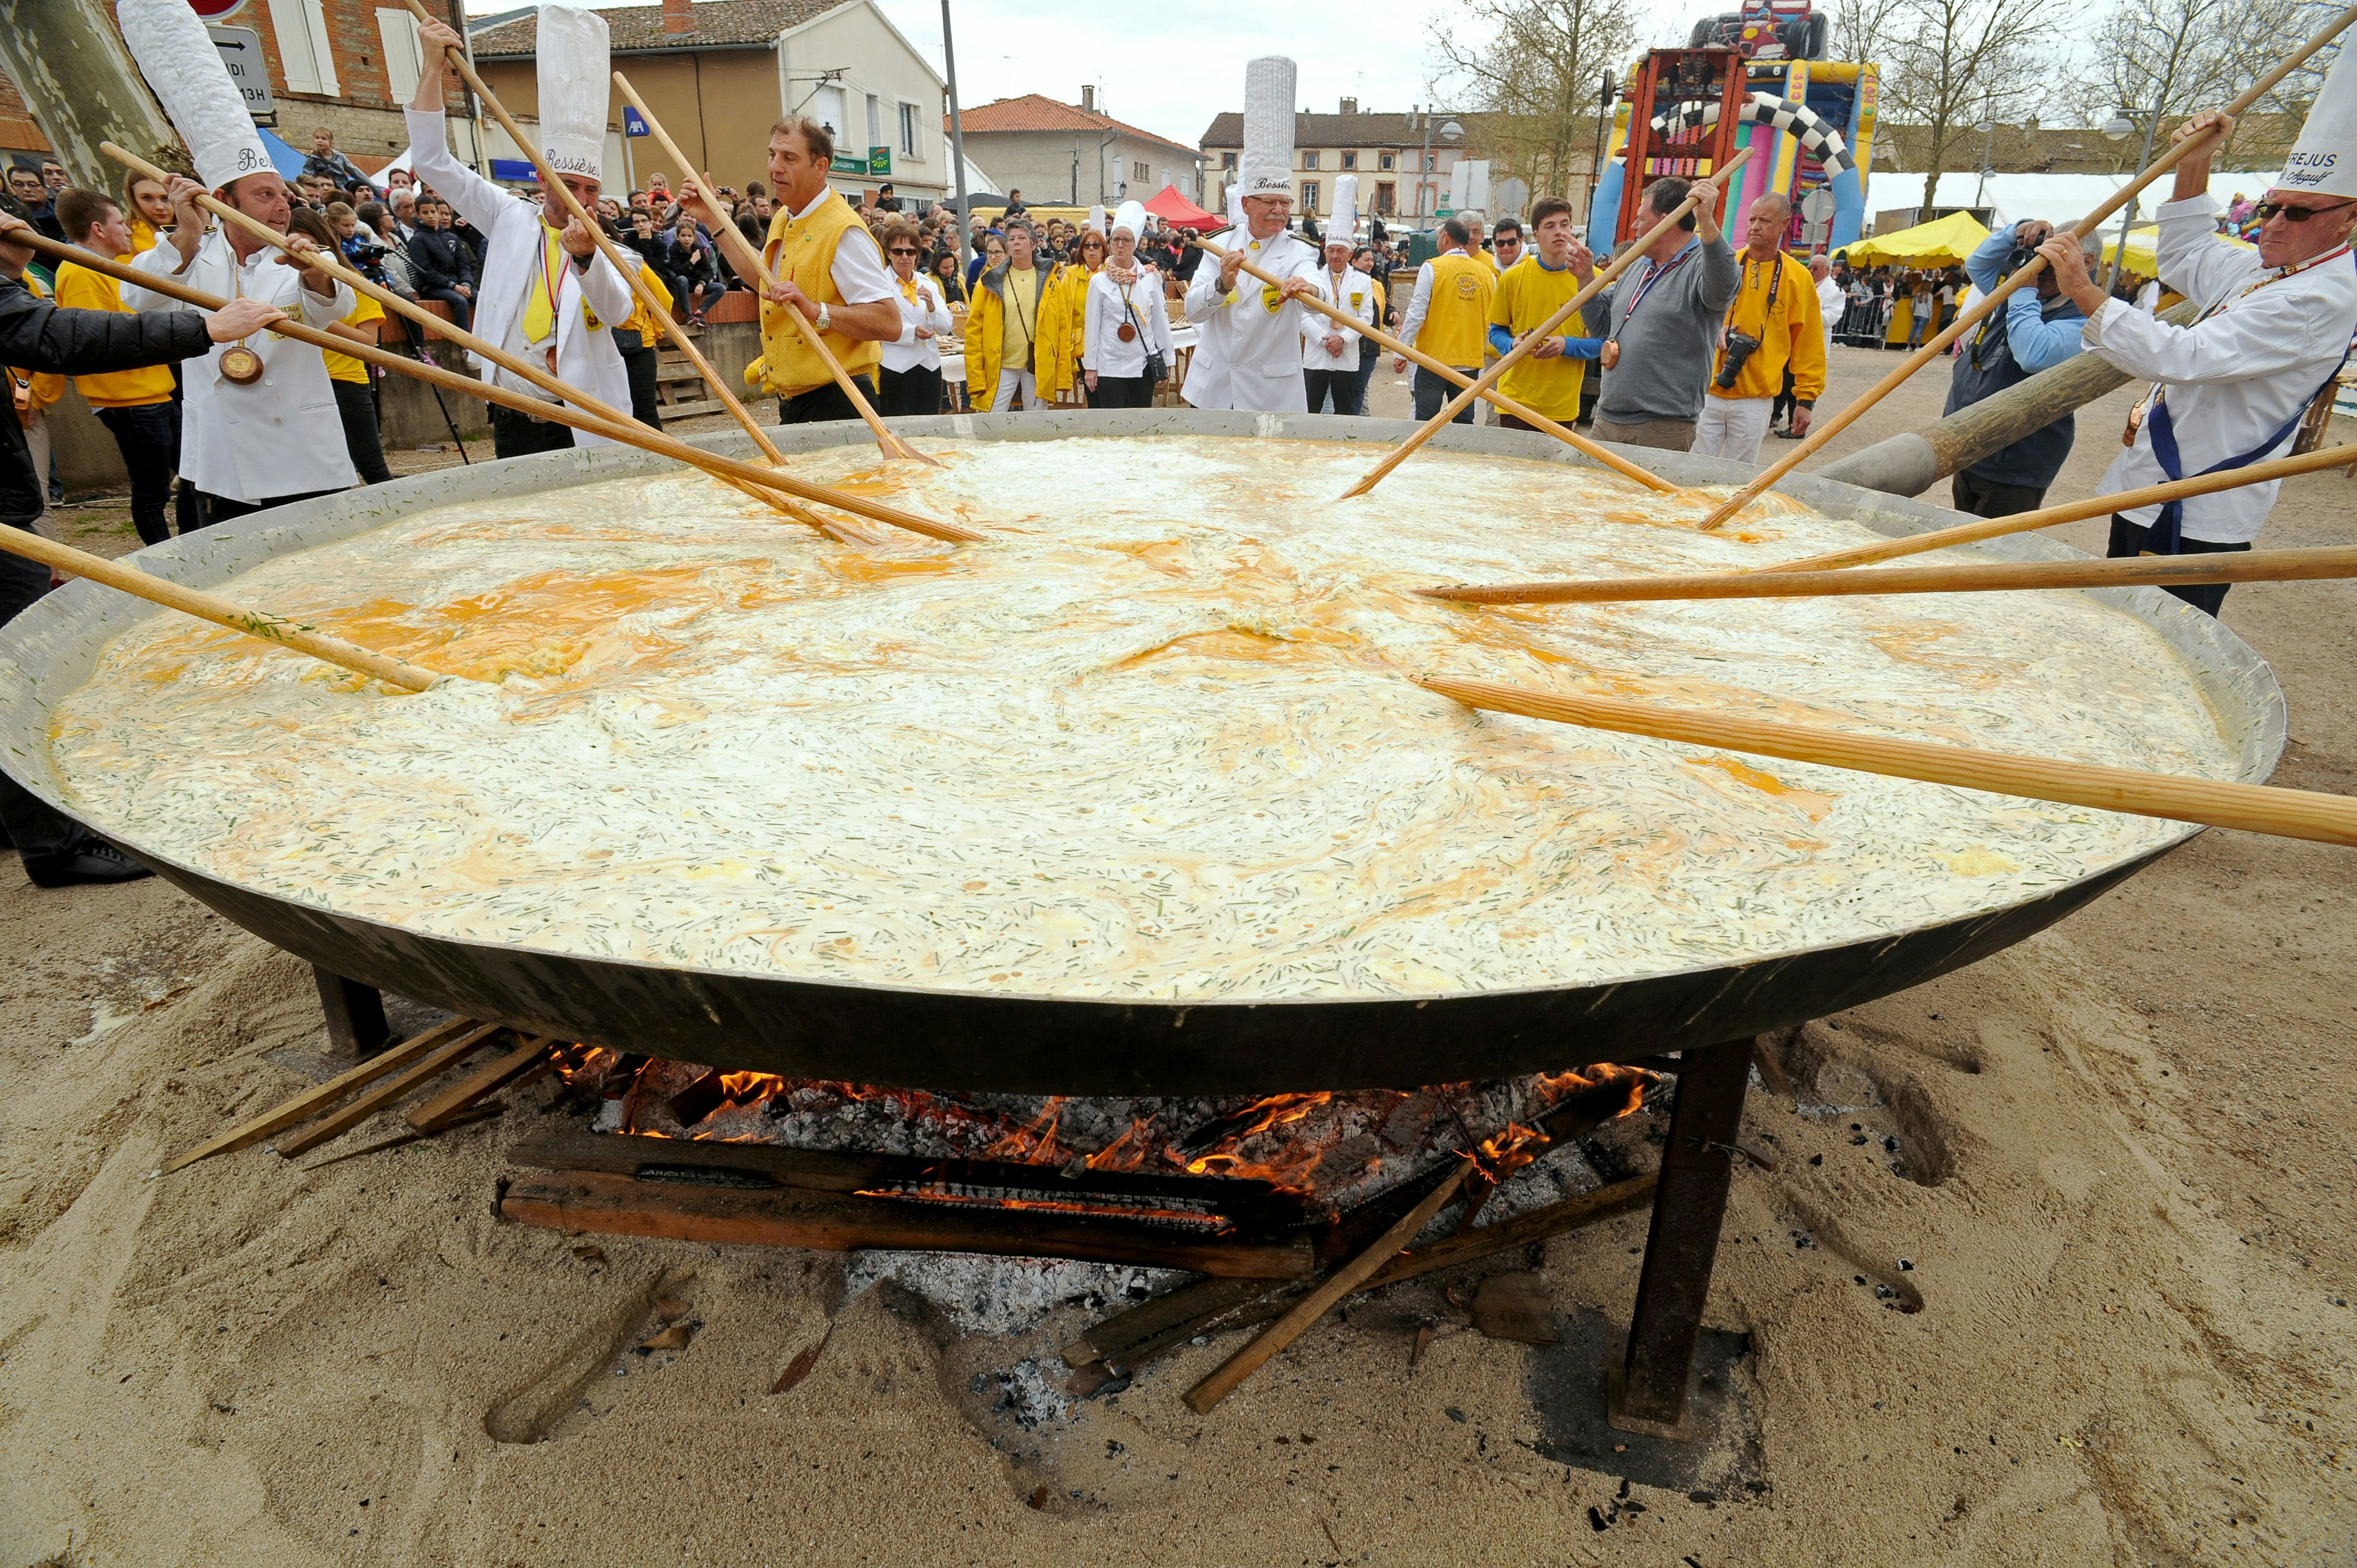 Members of the Giant Omelette Brotherhood of Bessieres cook a giant omelette as part of Easter celebrations on March 28, 2016, on the main square of Bessieres, southern France. Over 15,000 eggs were used to make the omelette. / AFP / REMY GABALDA (Photo credit should read REMY GABALDA/AFP/Getty Images)